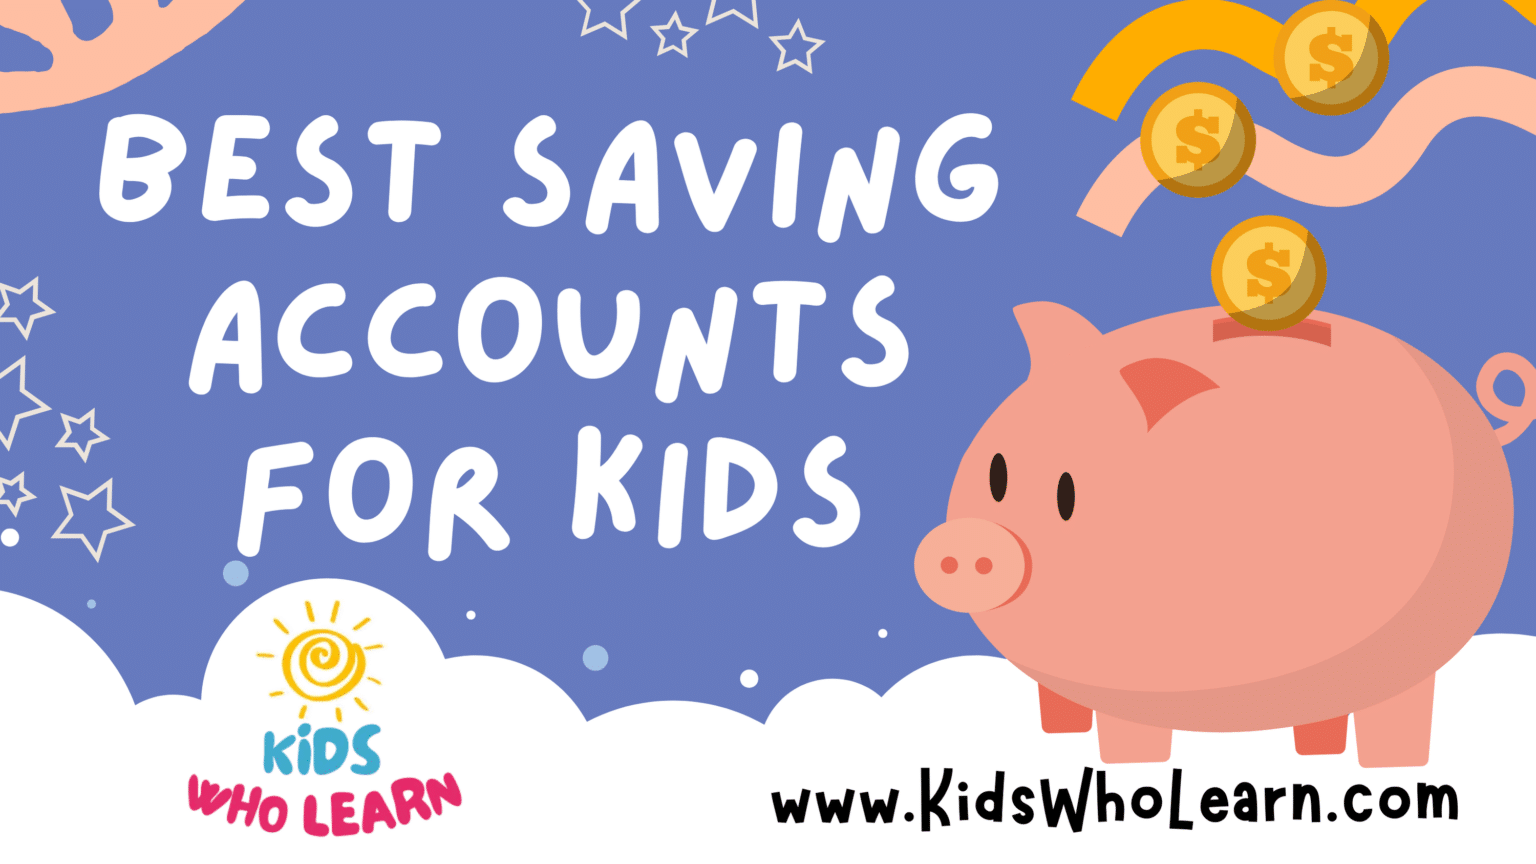 Best Saving Accounts For Kids